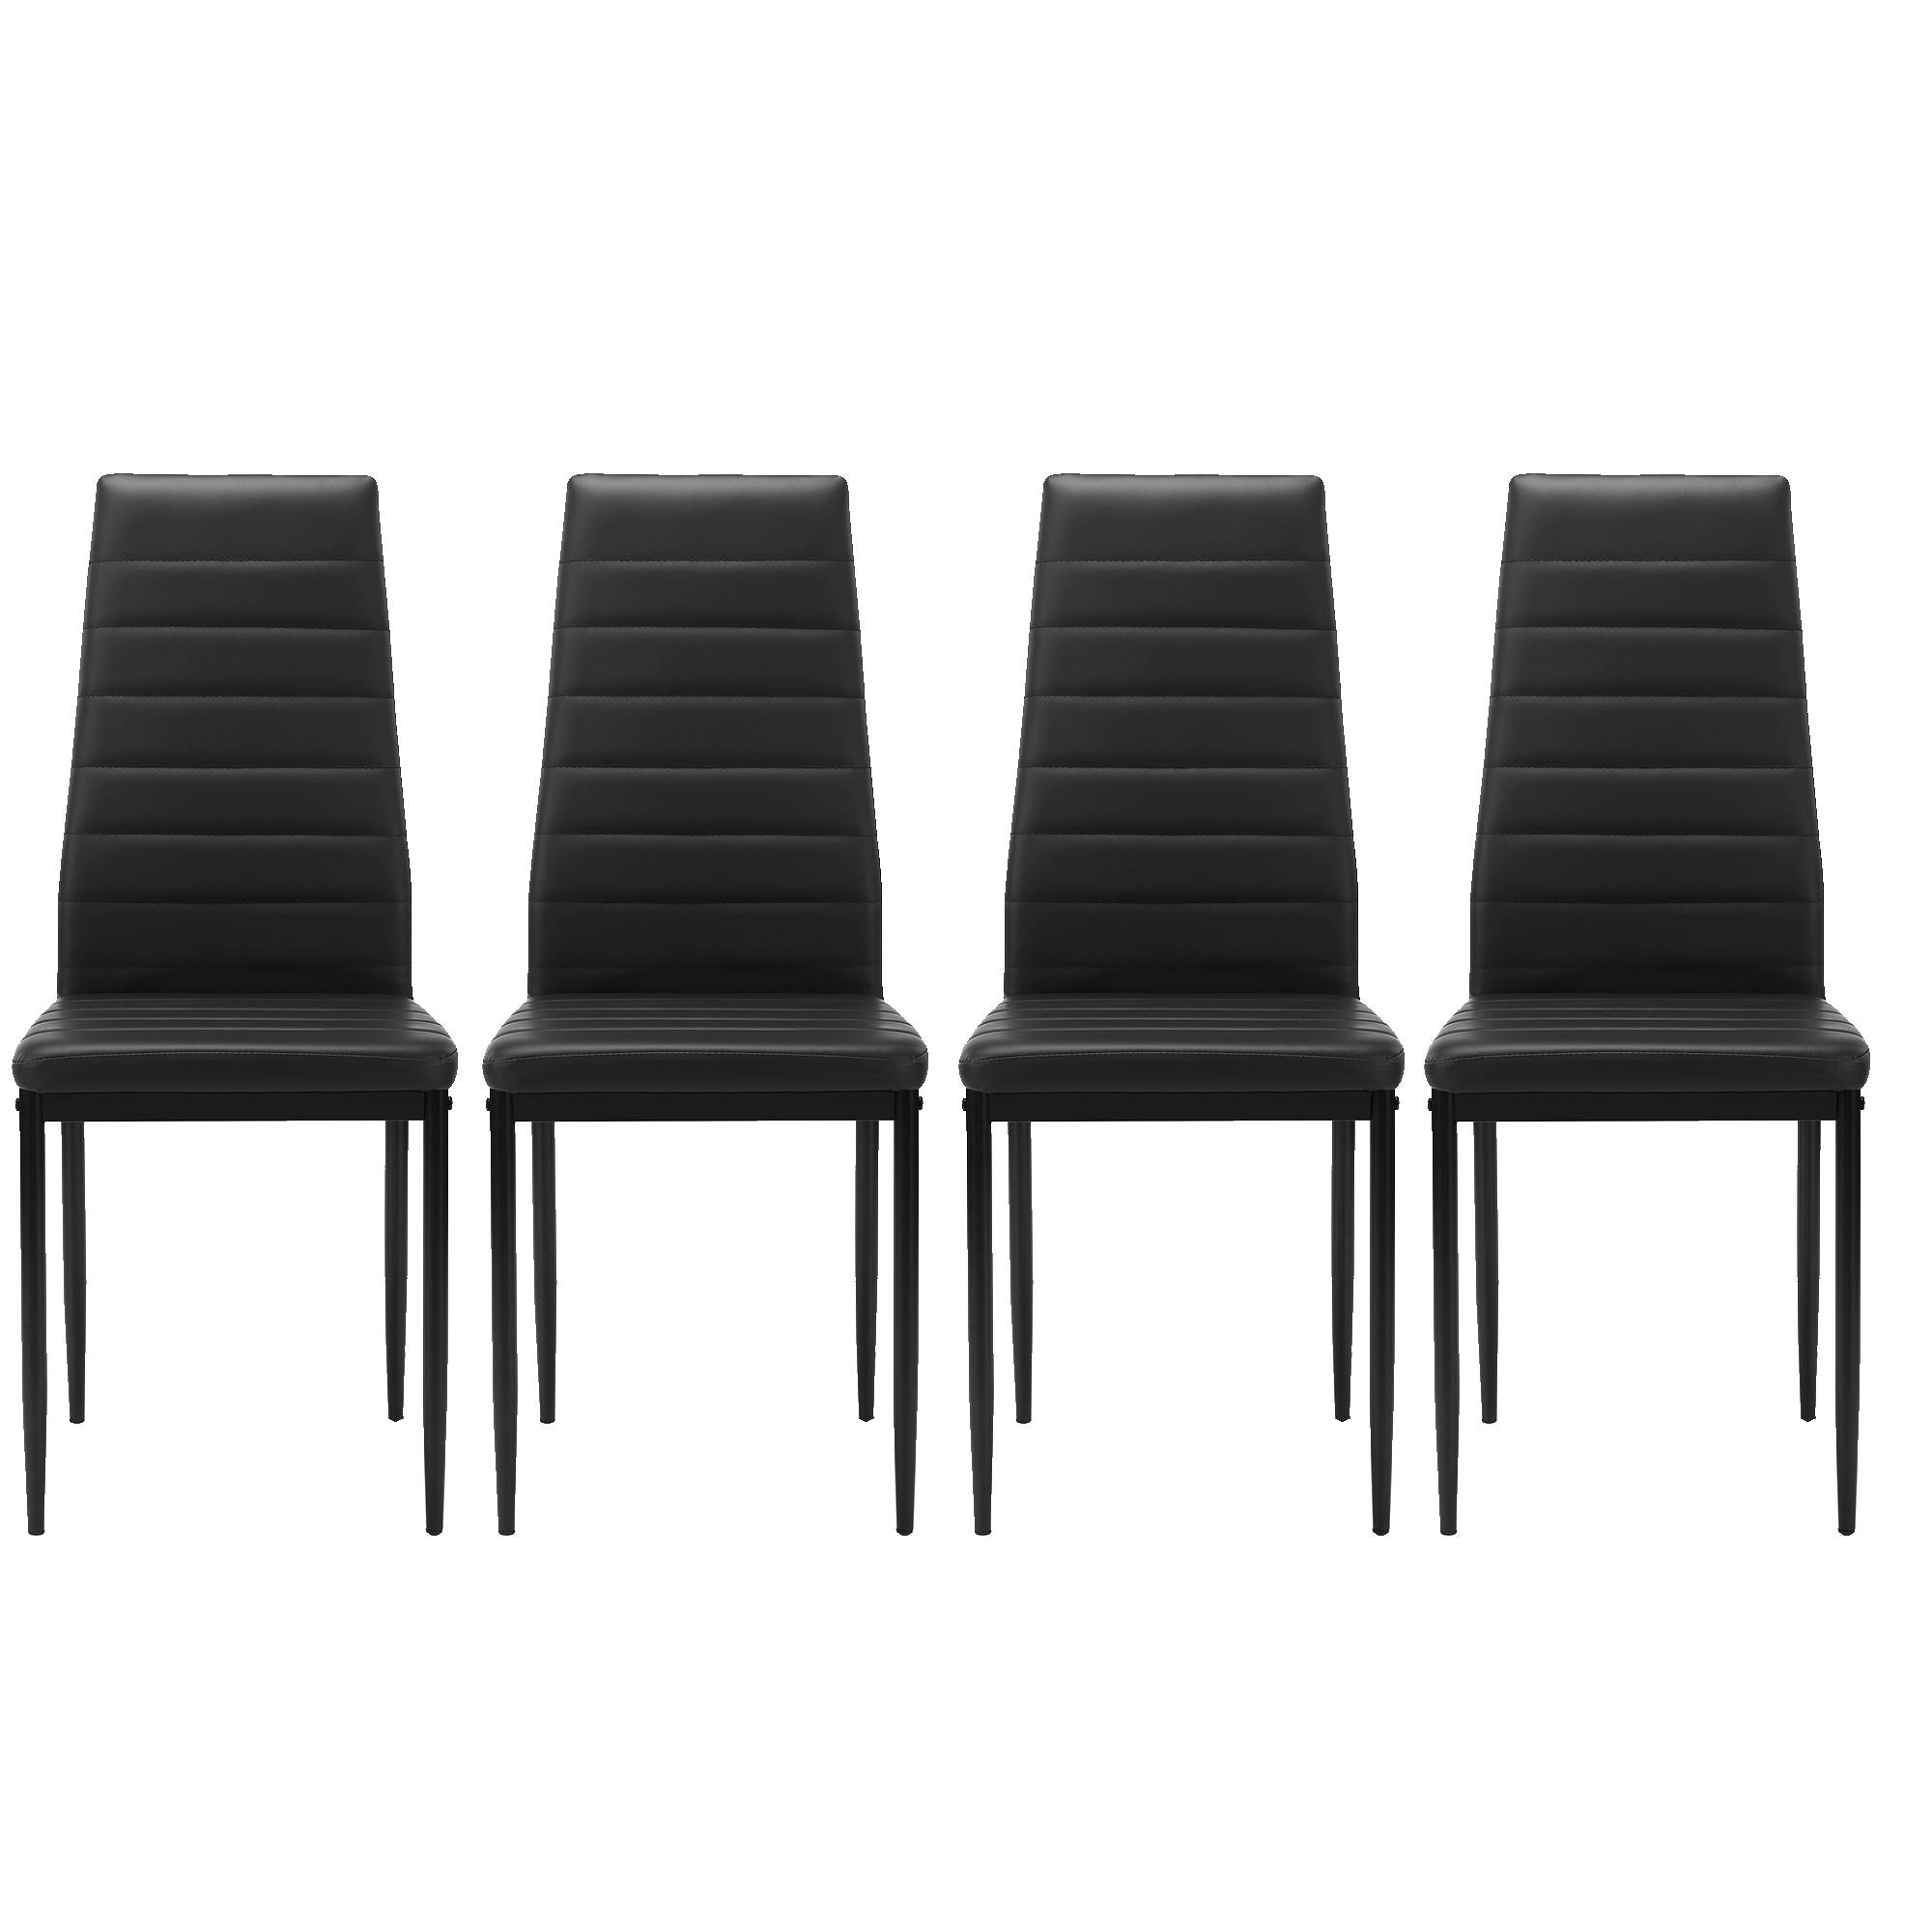 One set of four black dining chairs with a stylish, modern design. Comfortable enough for long meals and sturdy enough to last for years. Get yours today!